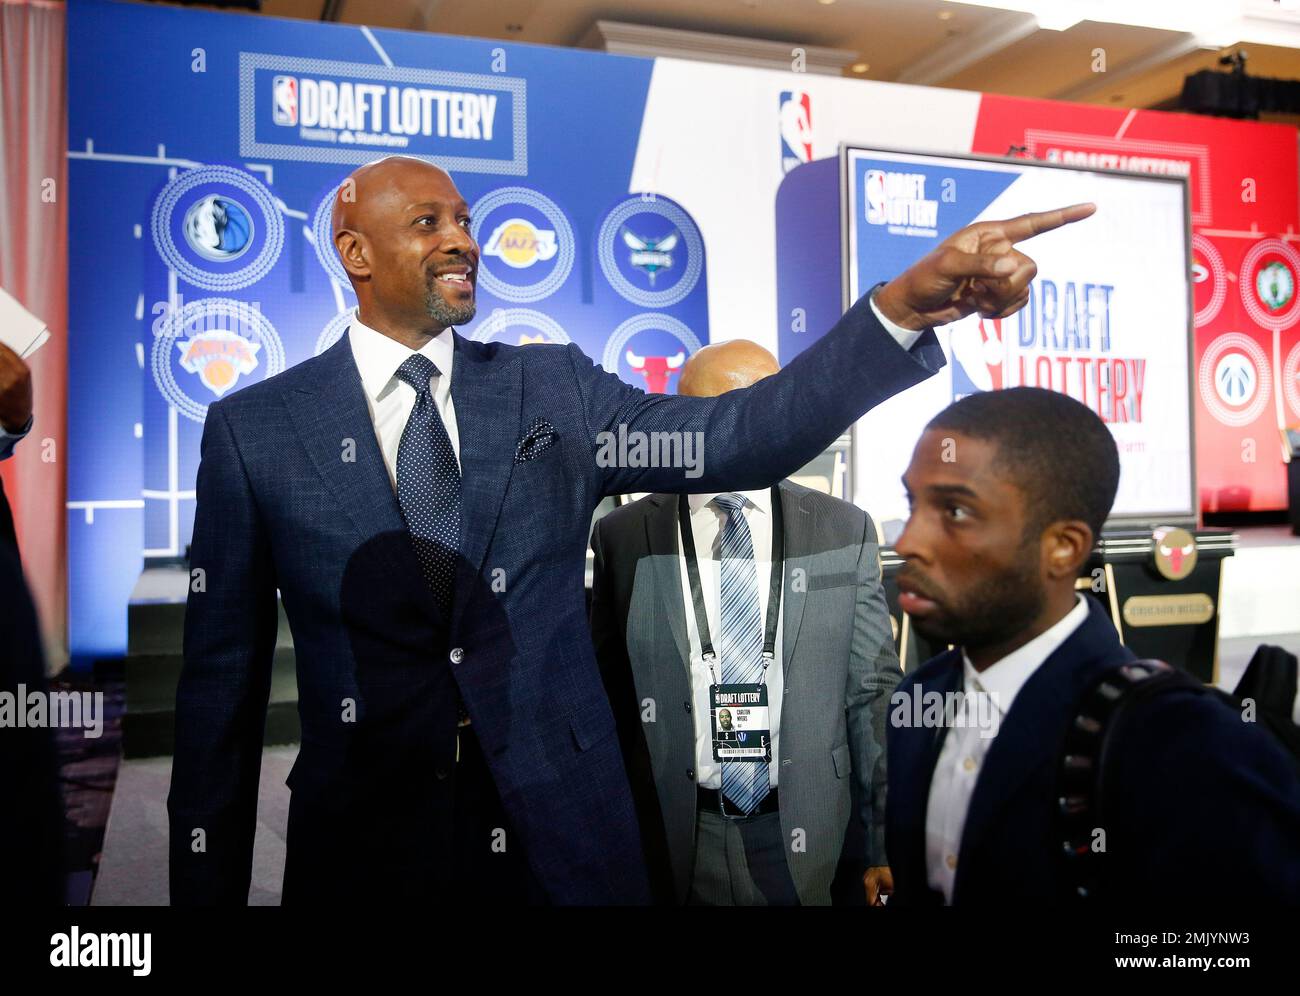 Alonzo Mourning to represent Heat at NBA Draft lottery